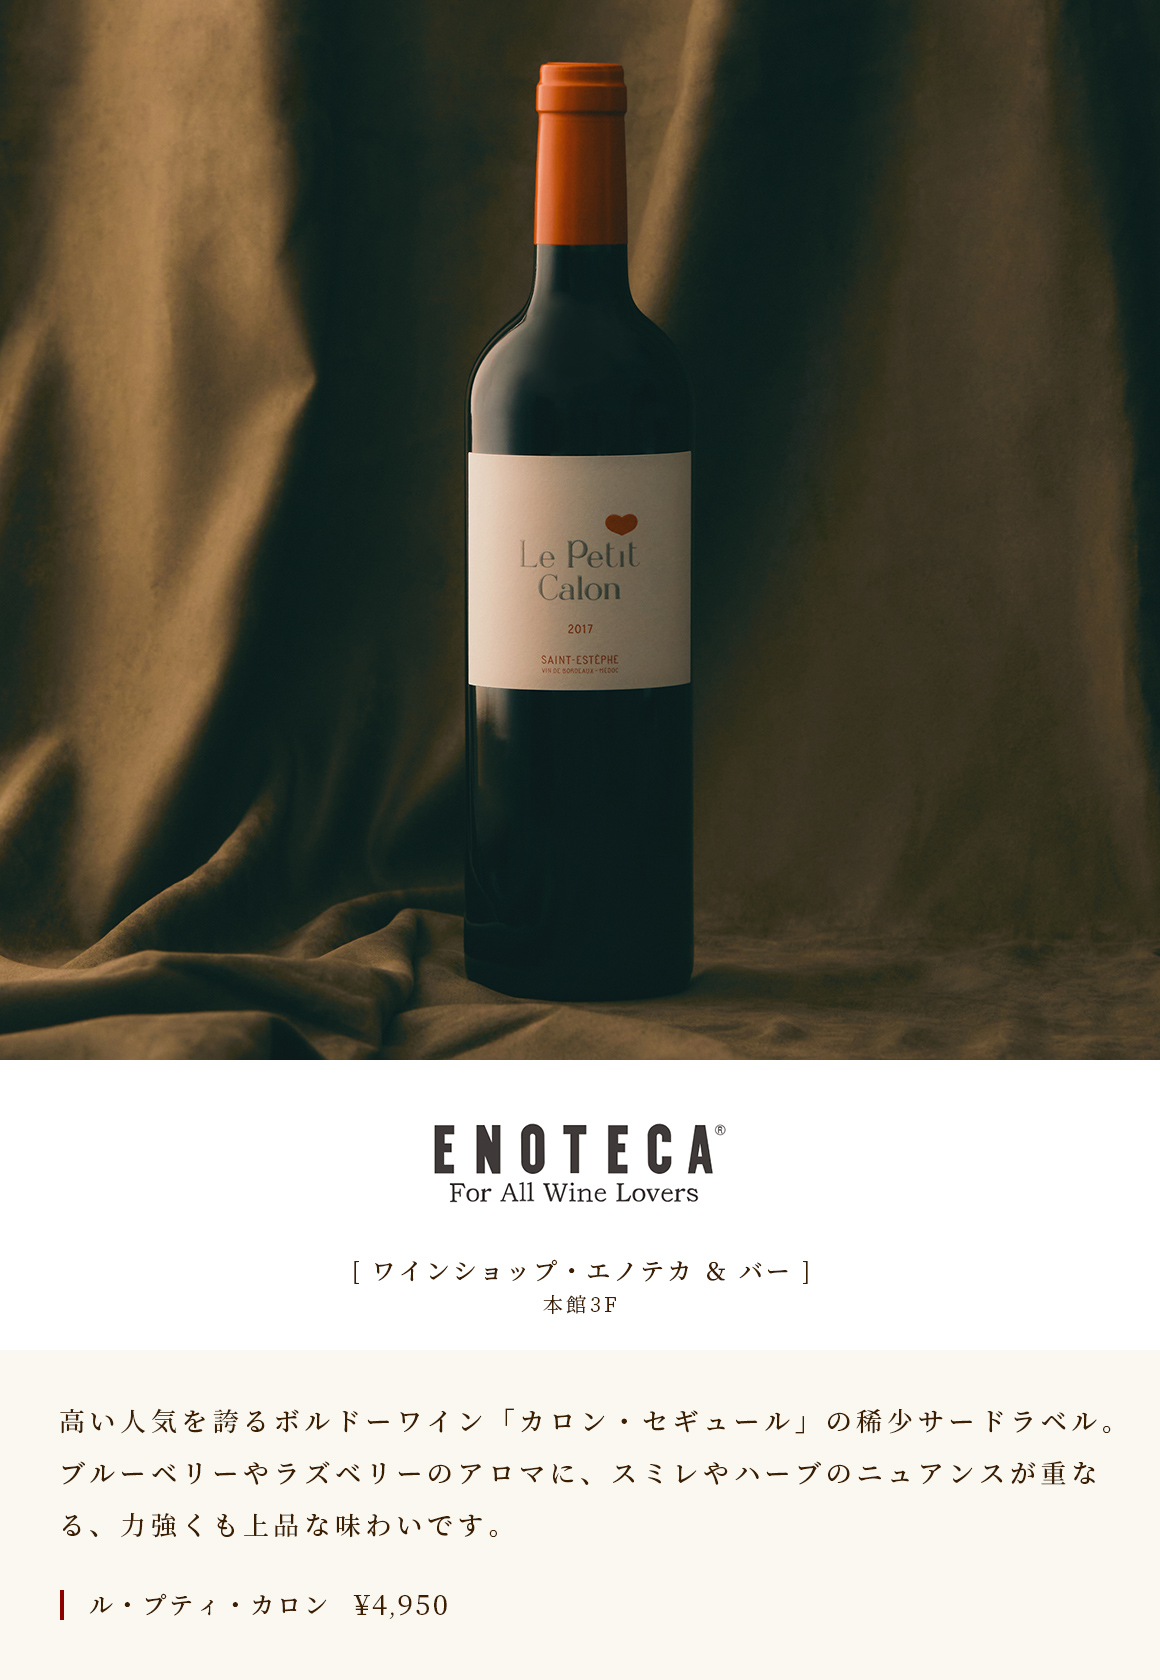 [WINE SHOP ENOTECA & BAR] Main Building 3F A rare third label of the highly popular Bordeaux wine "Caron Segur". The aroma of blueberries and raspberries overlaps with the nuances of violets and herbs, giving it a powerful yet elegant taste. Le Petit Caron￥4,950